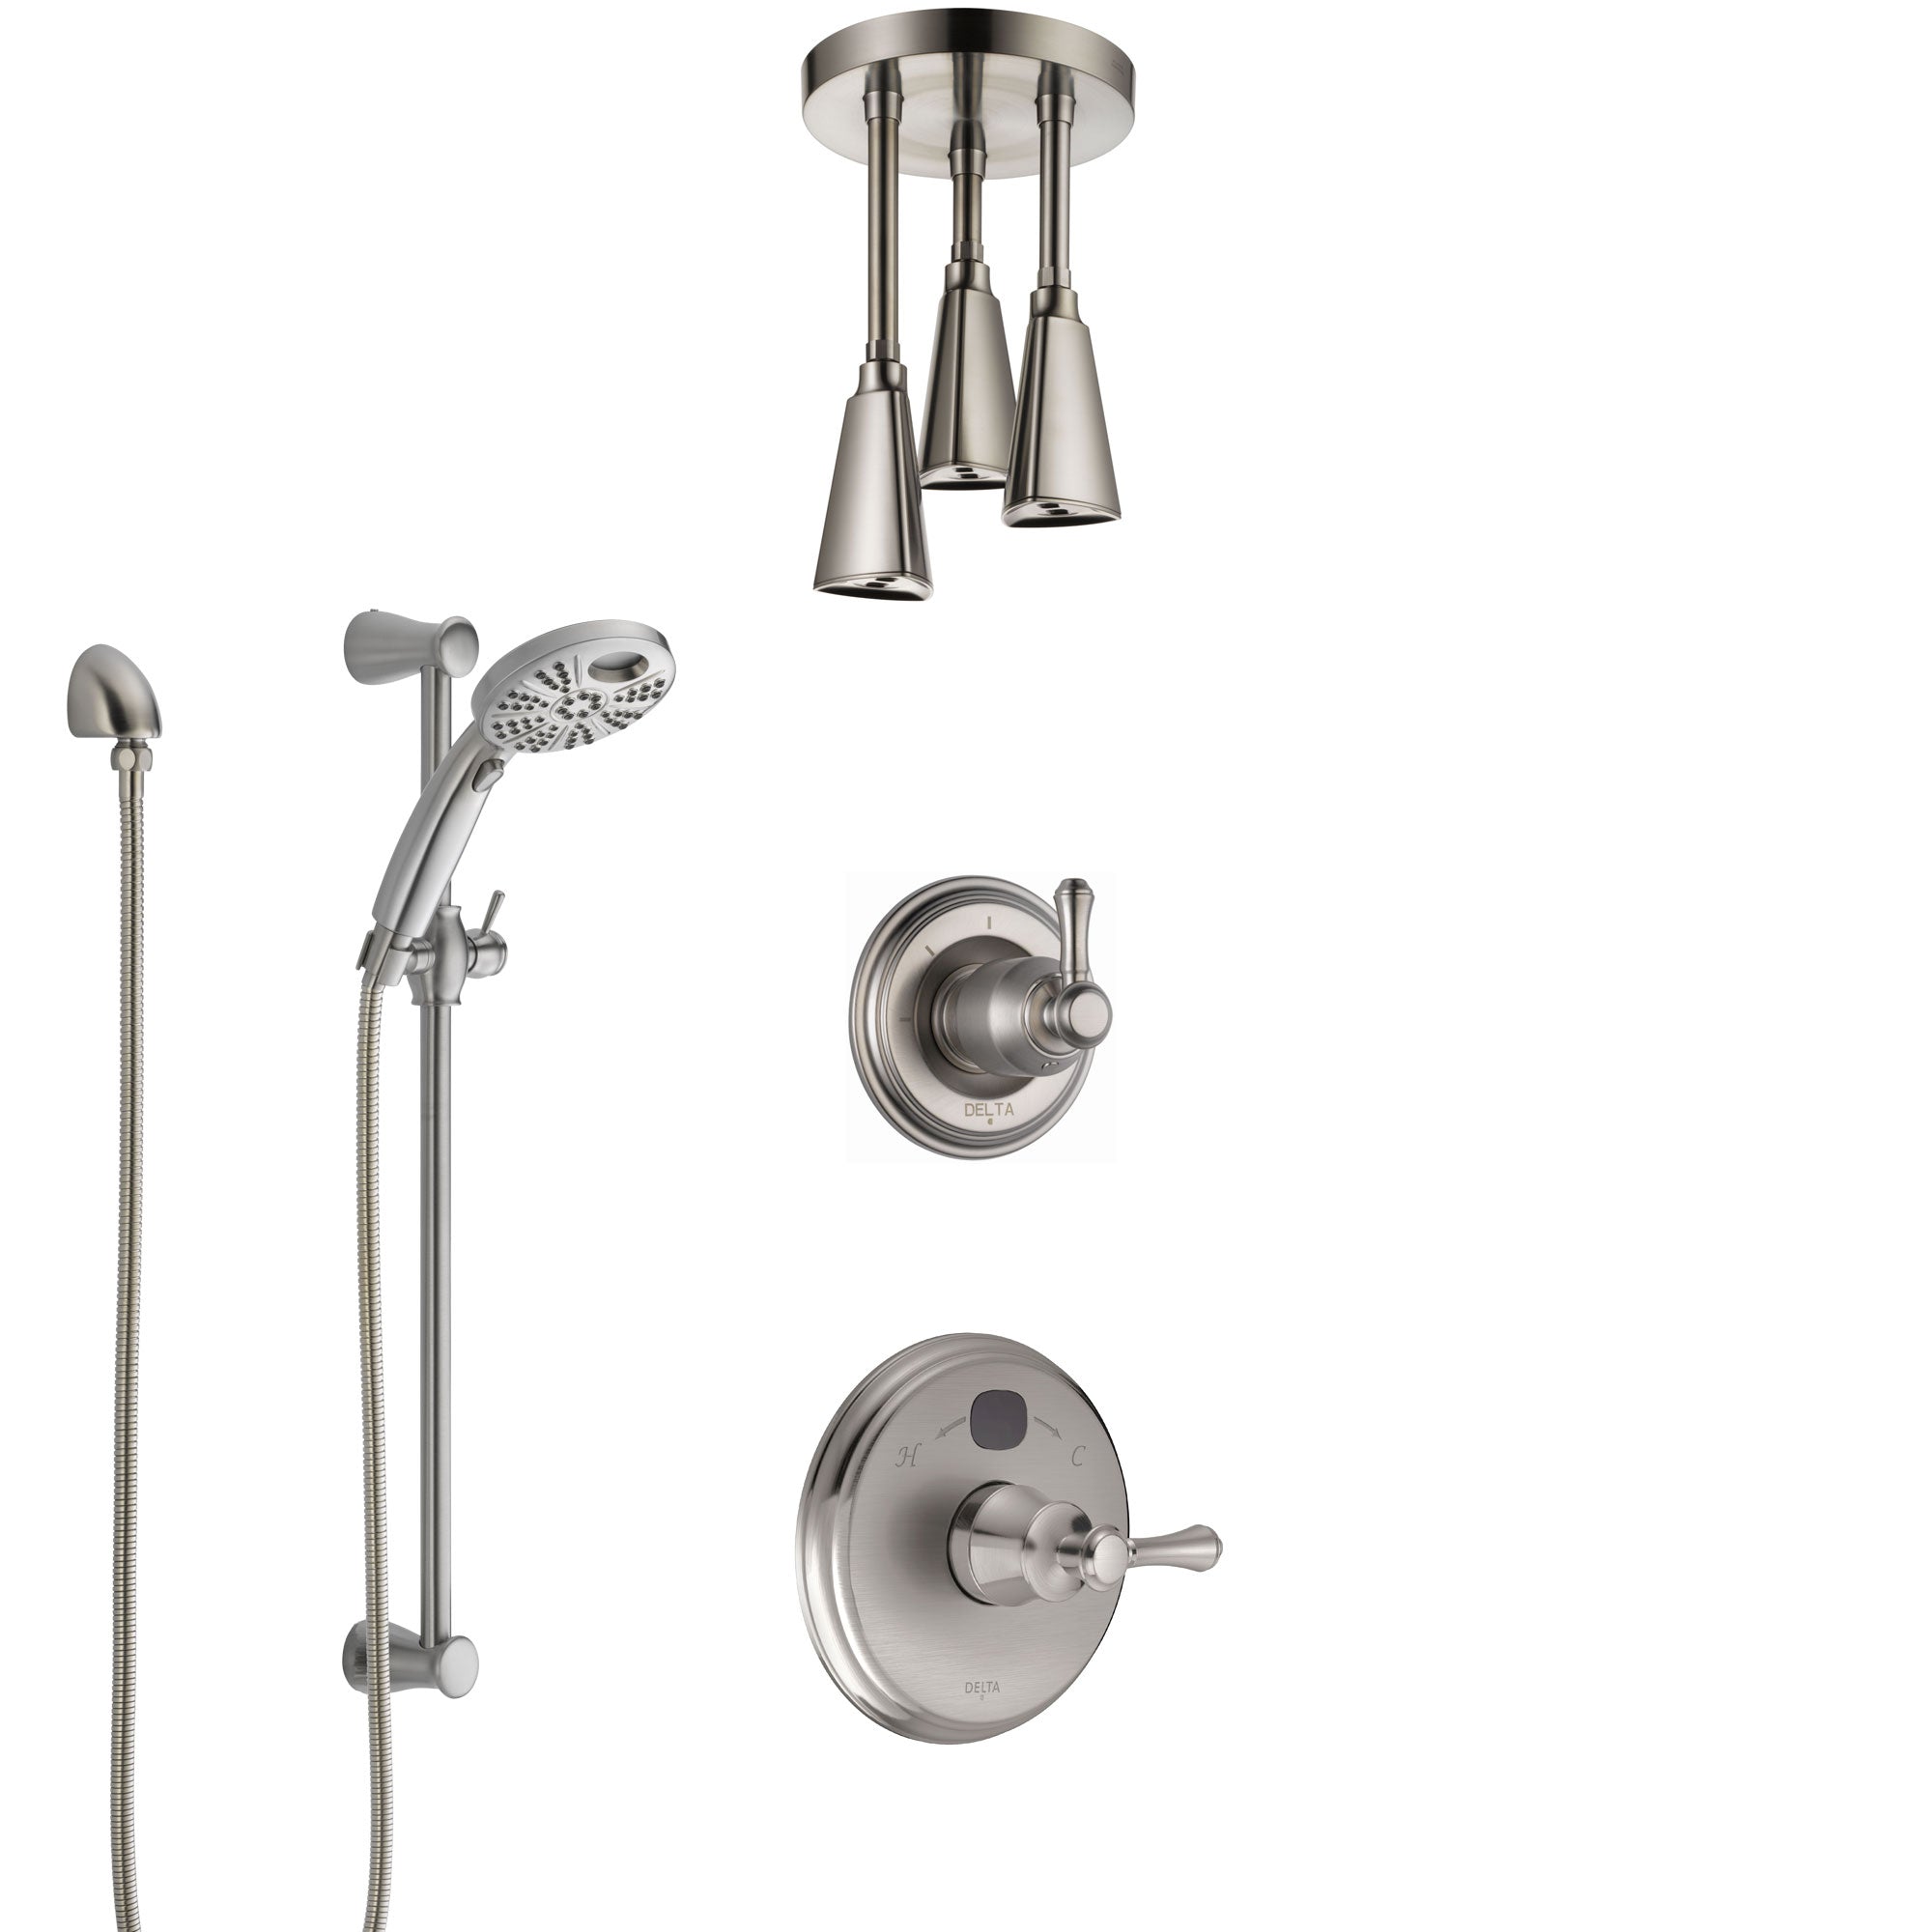 Delta Cassidy Stainless Steel Finish Shower System with Temp2O Control, Diverter, Ceiling Mount Showerhead, and Hand Shower with Slidebar SS14005SS7